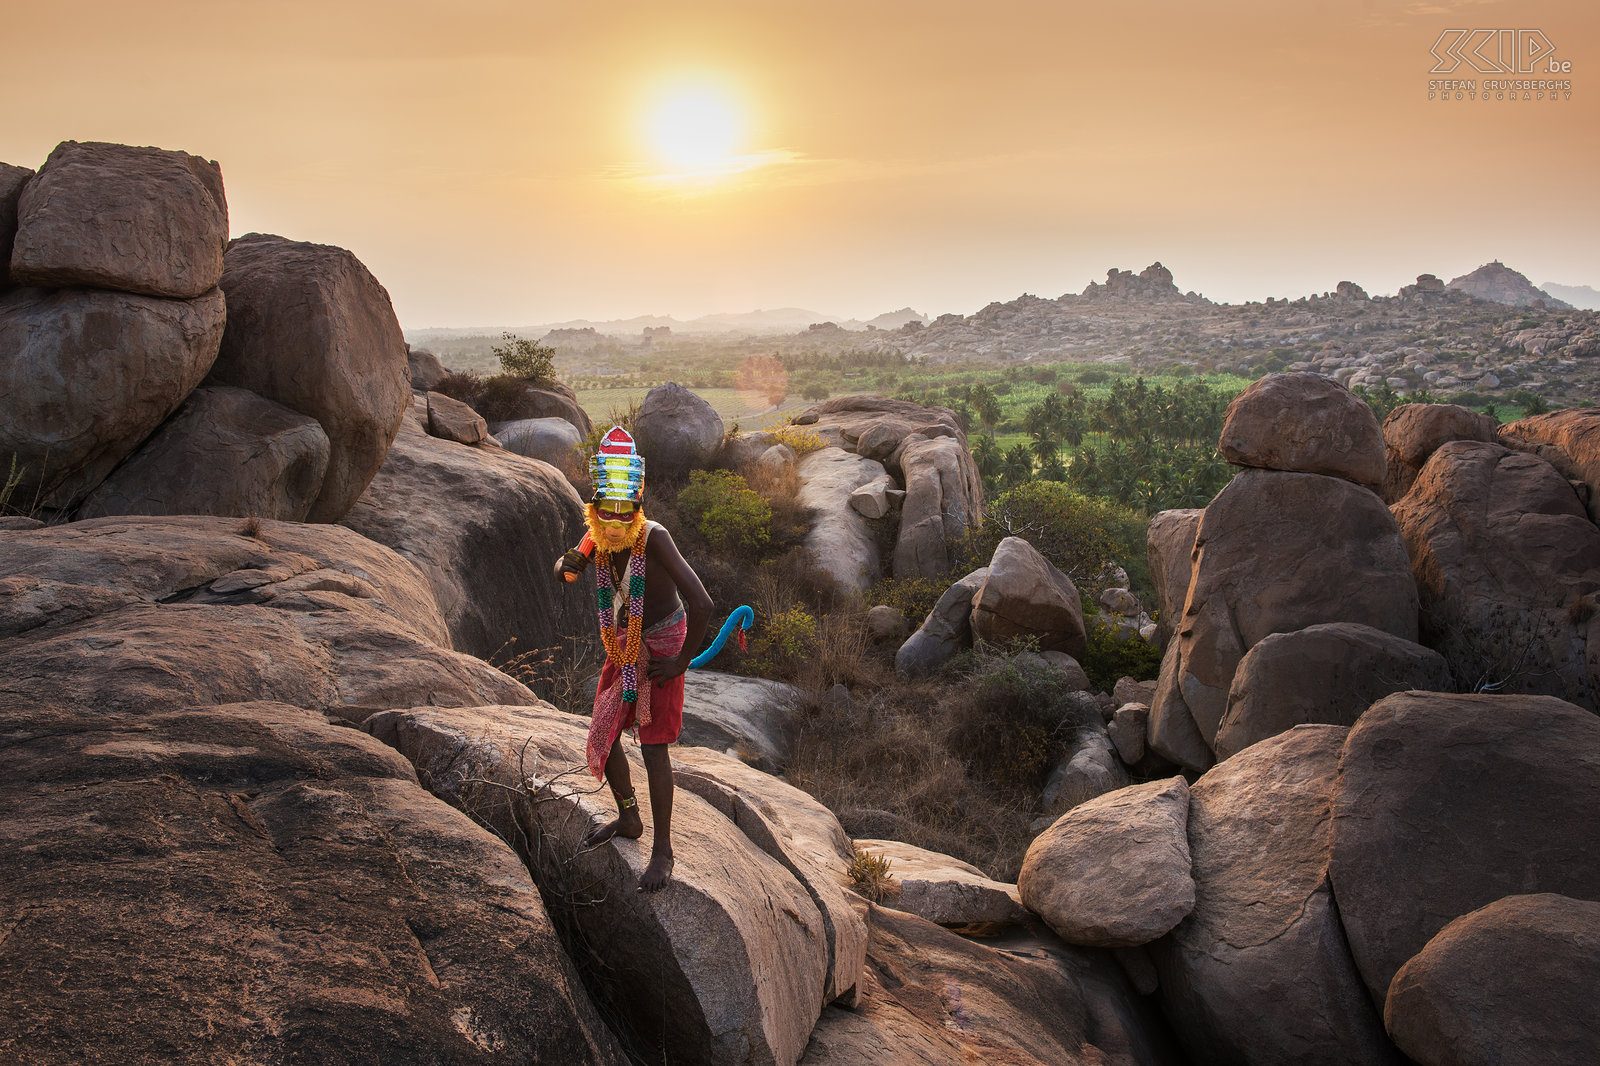 Hampi - Malyavanta hill - Hanuman Malyavanta Hill is not as high as the Matunga Hill but at sunset there are less tourists. The scenery is also stunning. While making photos of the sunset and the impressive boulders Hanuman, the monkey god, came to say hello. Stefan Cruysberghs